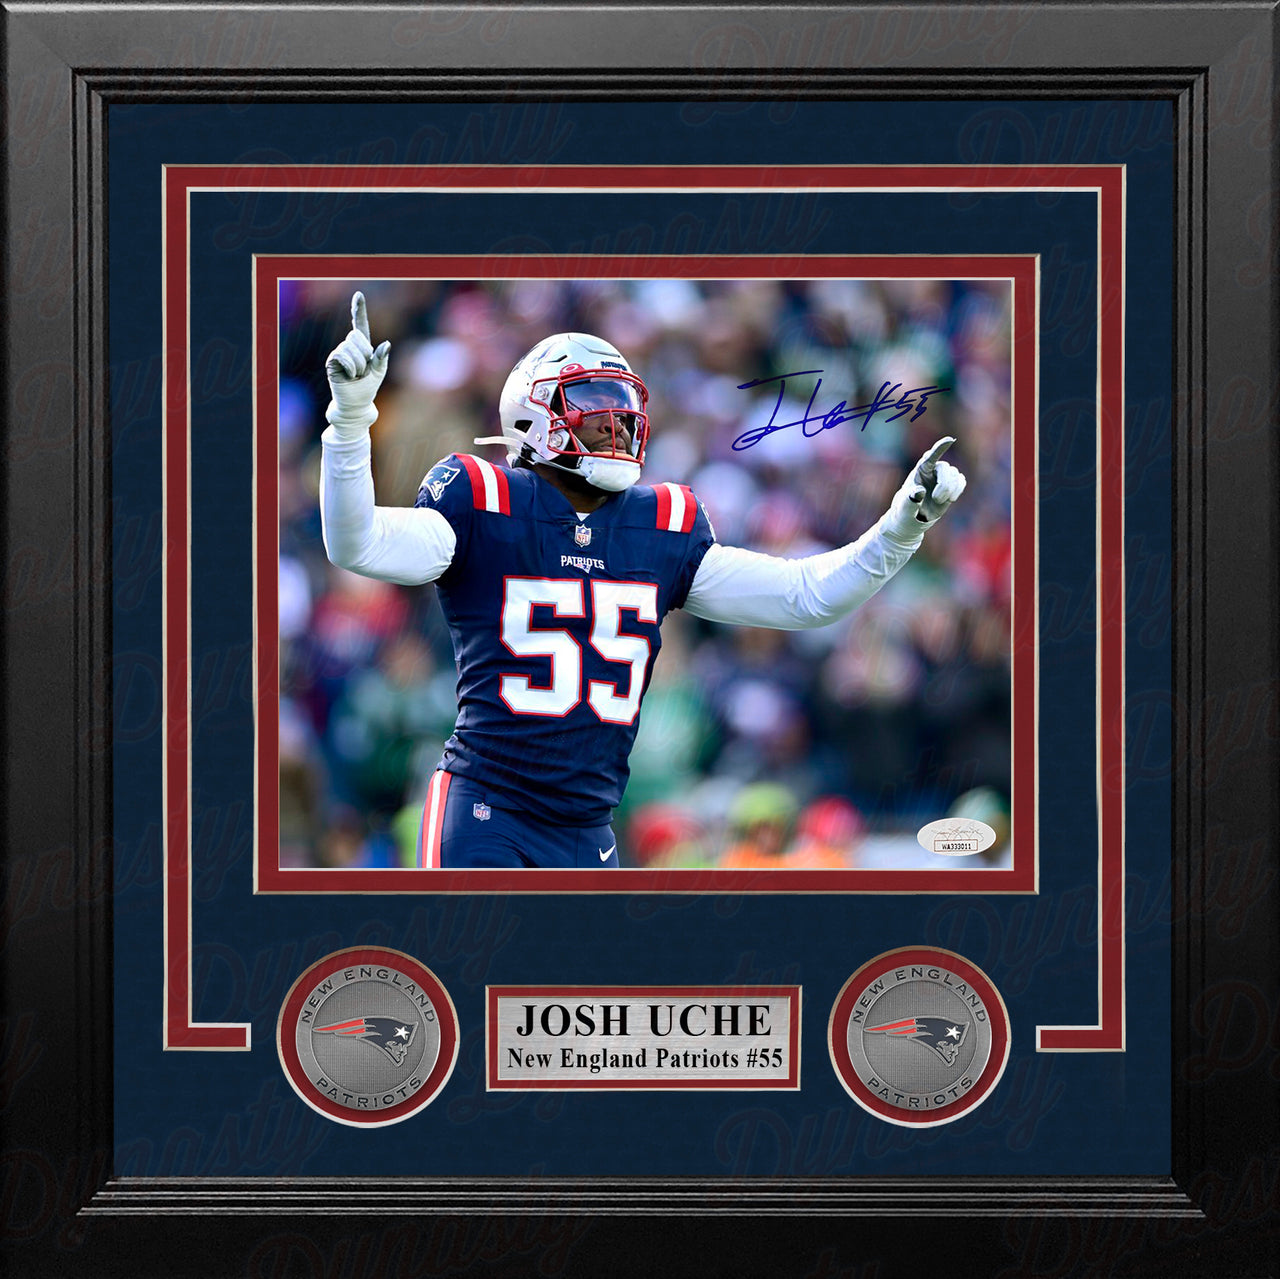 Josh Uche in Action New England Patriots Autographed 8" x 10" Framed Football Photo - Dynasty Sports & Framing 